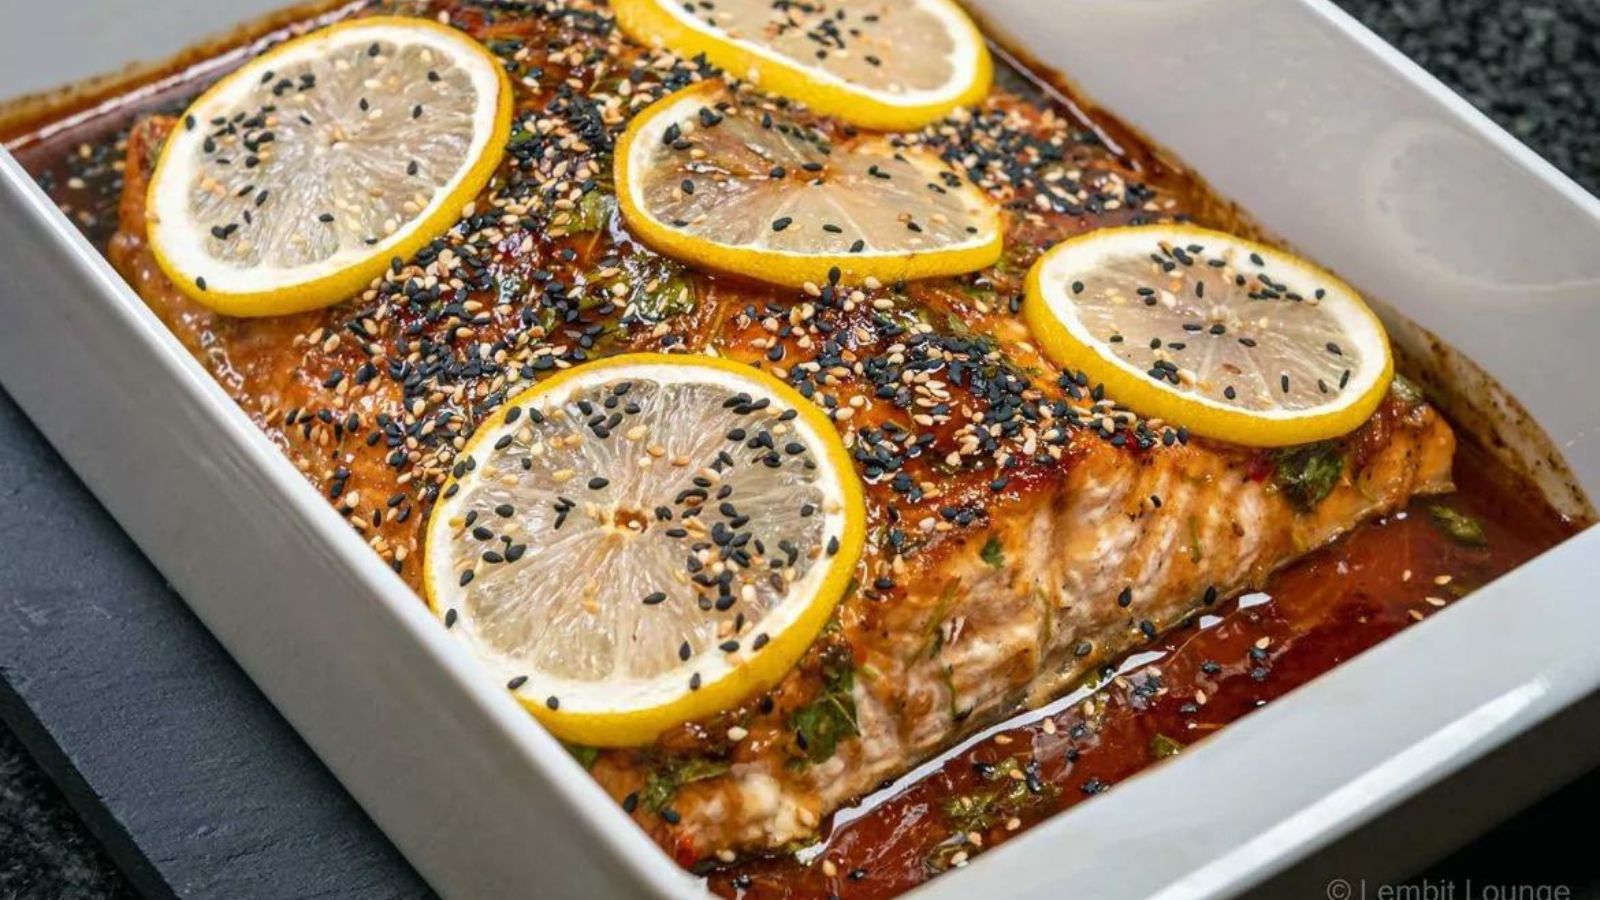 <p>Tasty oven-baked salmon with Asian marinade that takes care of itself in the oven A excellent dinner to cook when time is short. I made this recipe several times and I always enjoy it. And I’m just telling you now: you’re going to love this salmon. Juicy, super tasty and easy-to-cook salmon that you just have to put in the oven. I really like one-pot-dishes. The salmon is brushed with a good spicy marinade with Asian flavors of garlic, ginger. lime, coriander and a hint of sweetness from sweet chili.</p><p><strong>Recipe: <a href="https://www.lembitloungecuisine.com/2022/01/17/baked-salmon-with-asian-marinade/">baked salmon with asian marinade</a></strong></p>